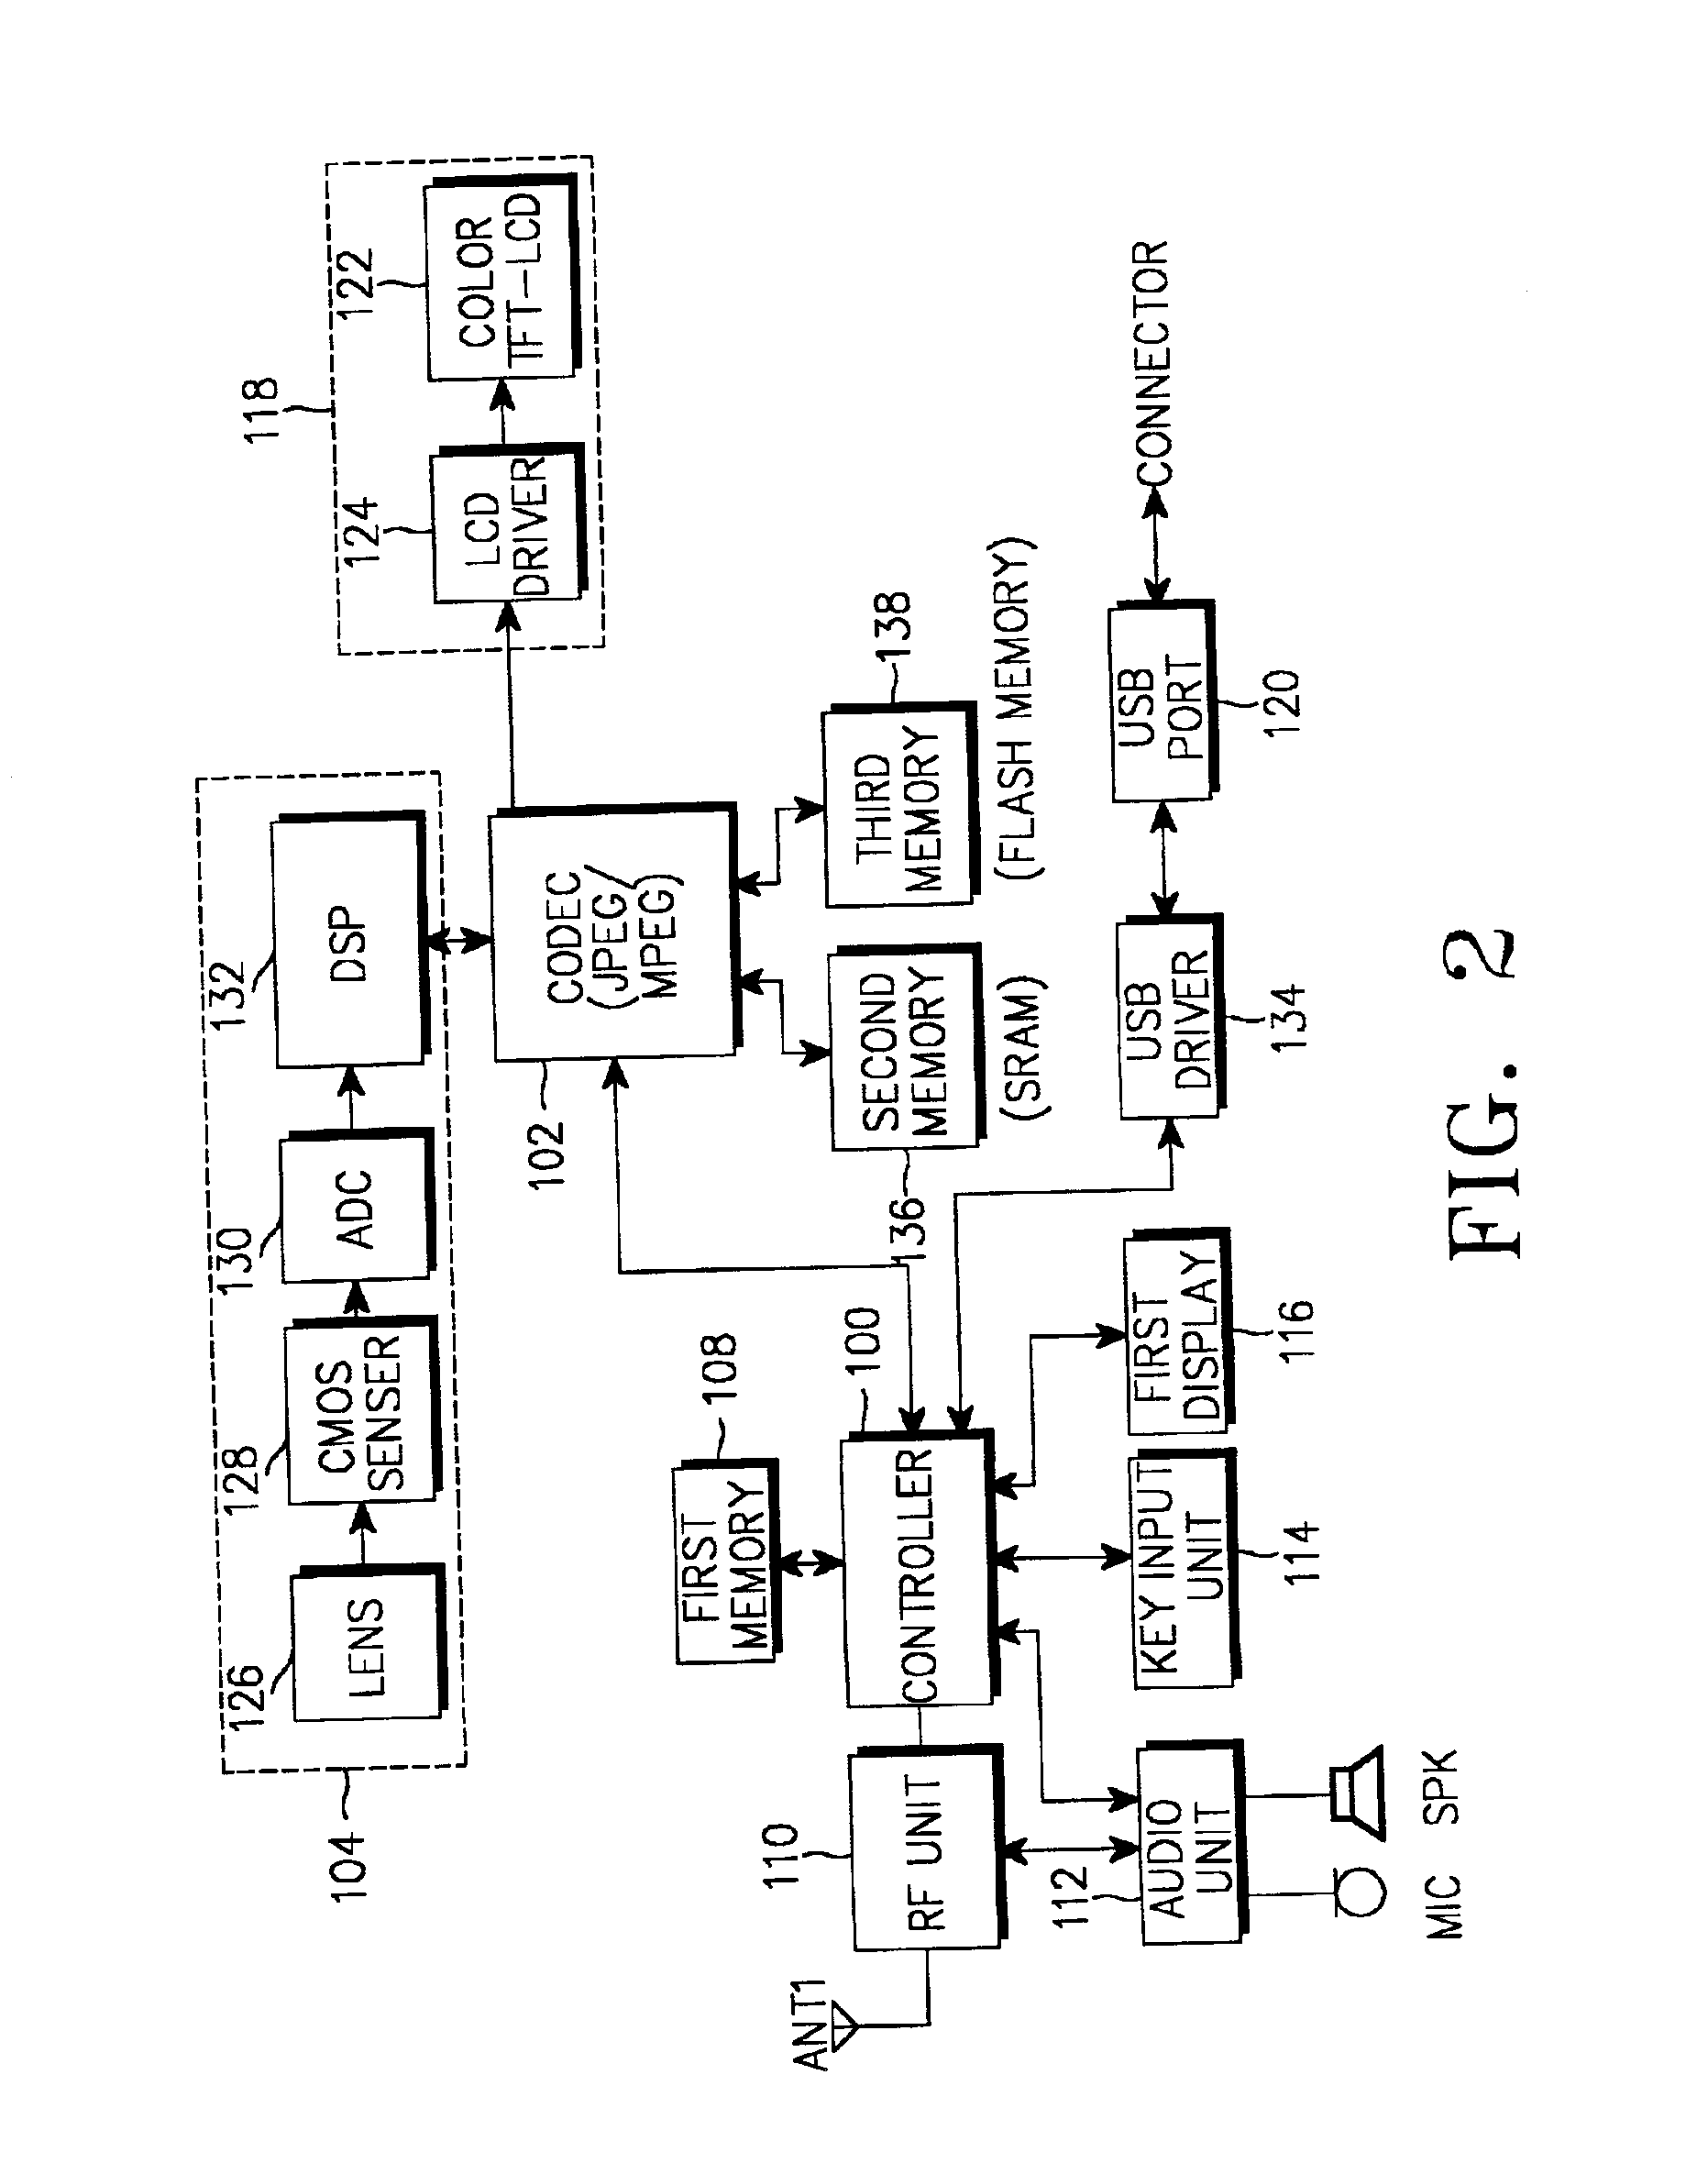 Remote monitoring apparatus using a mobile videophone